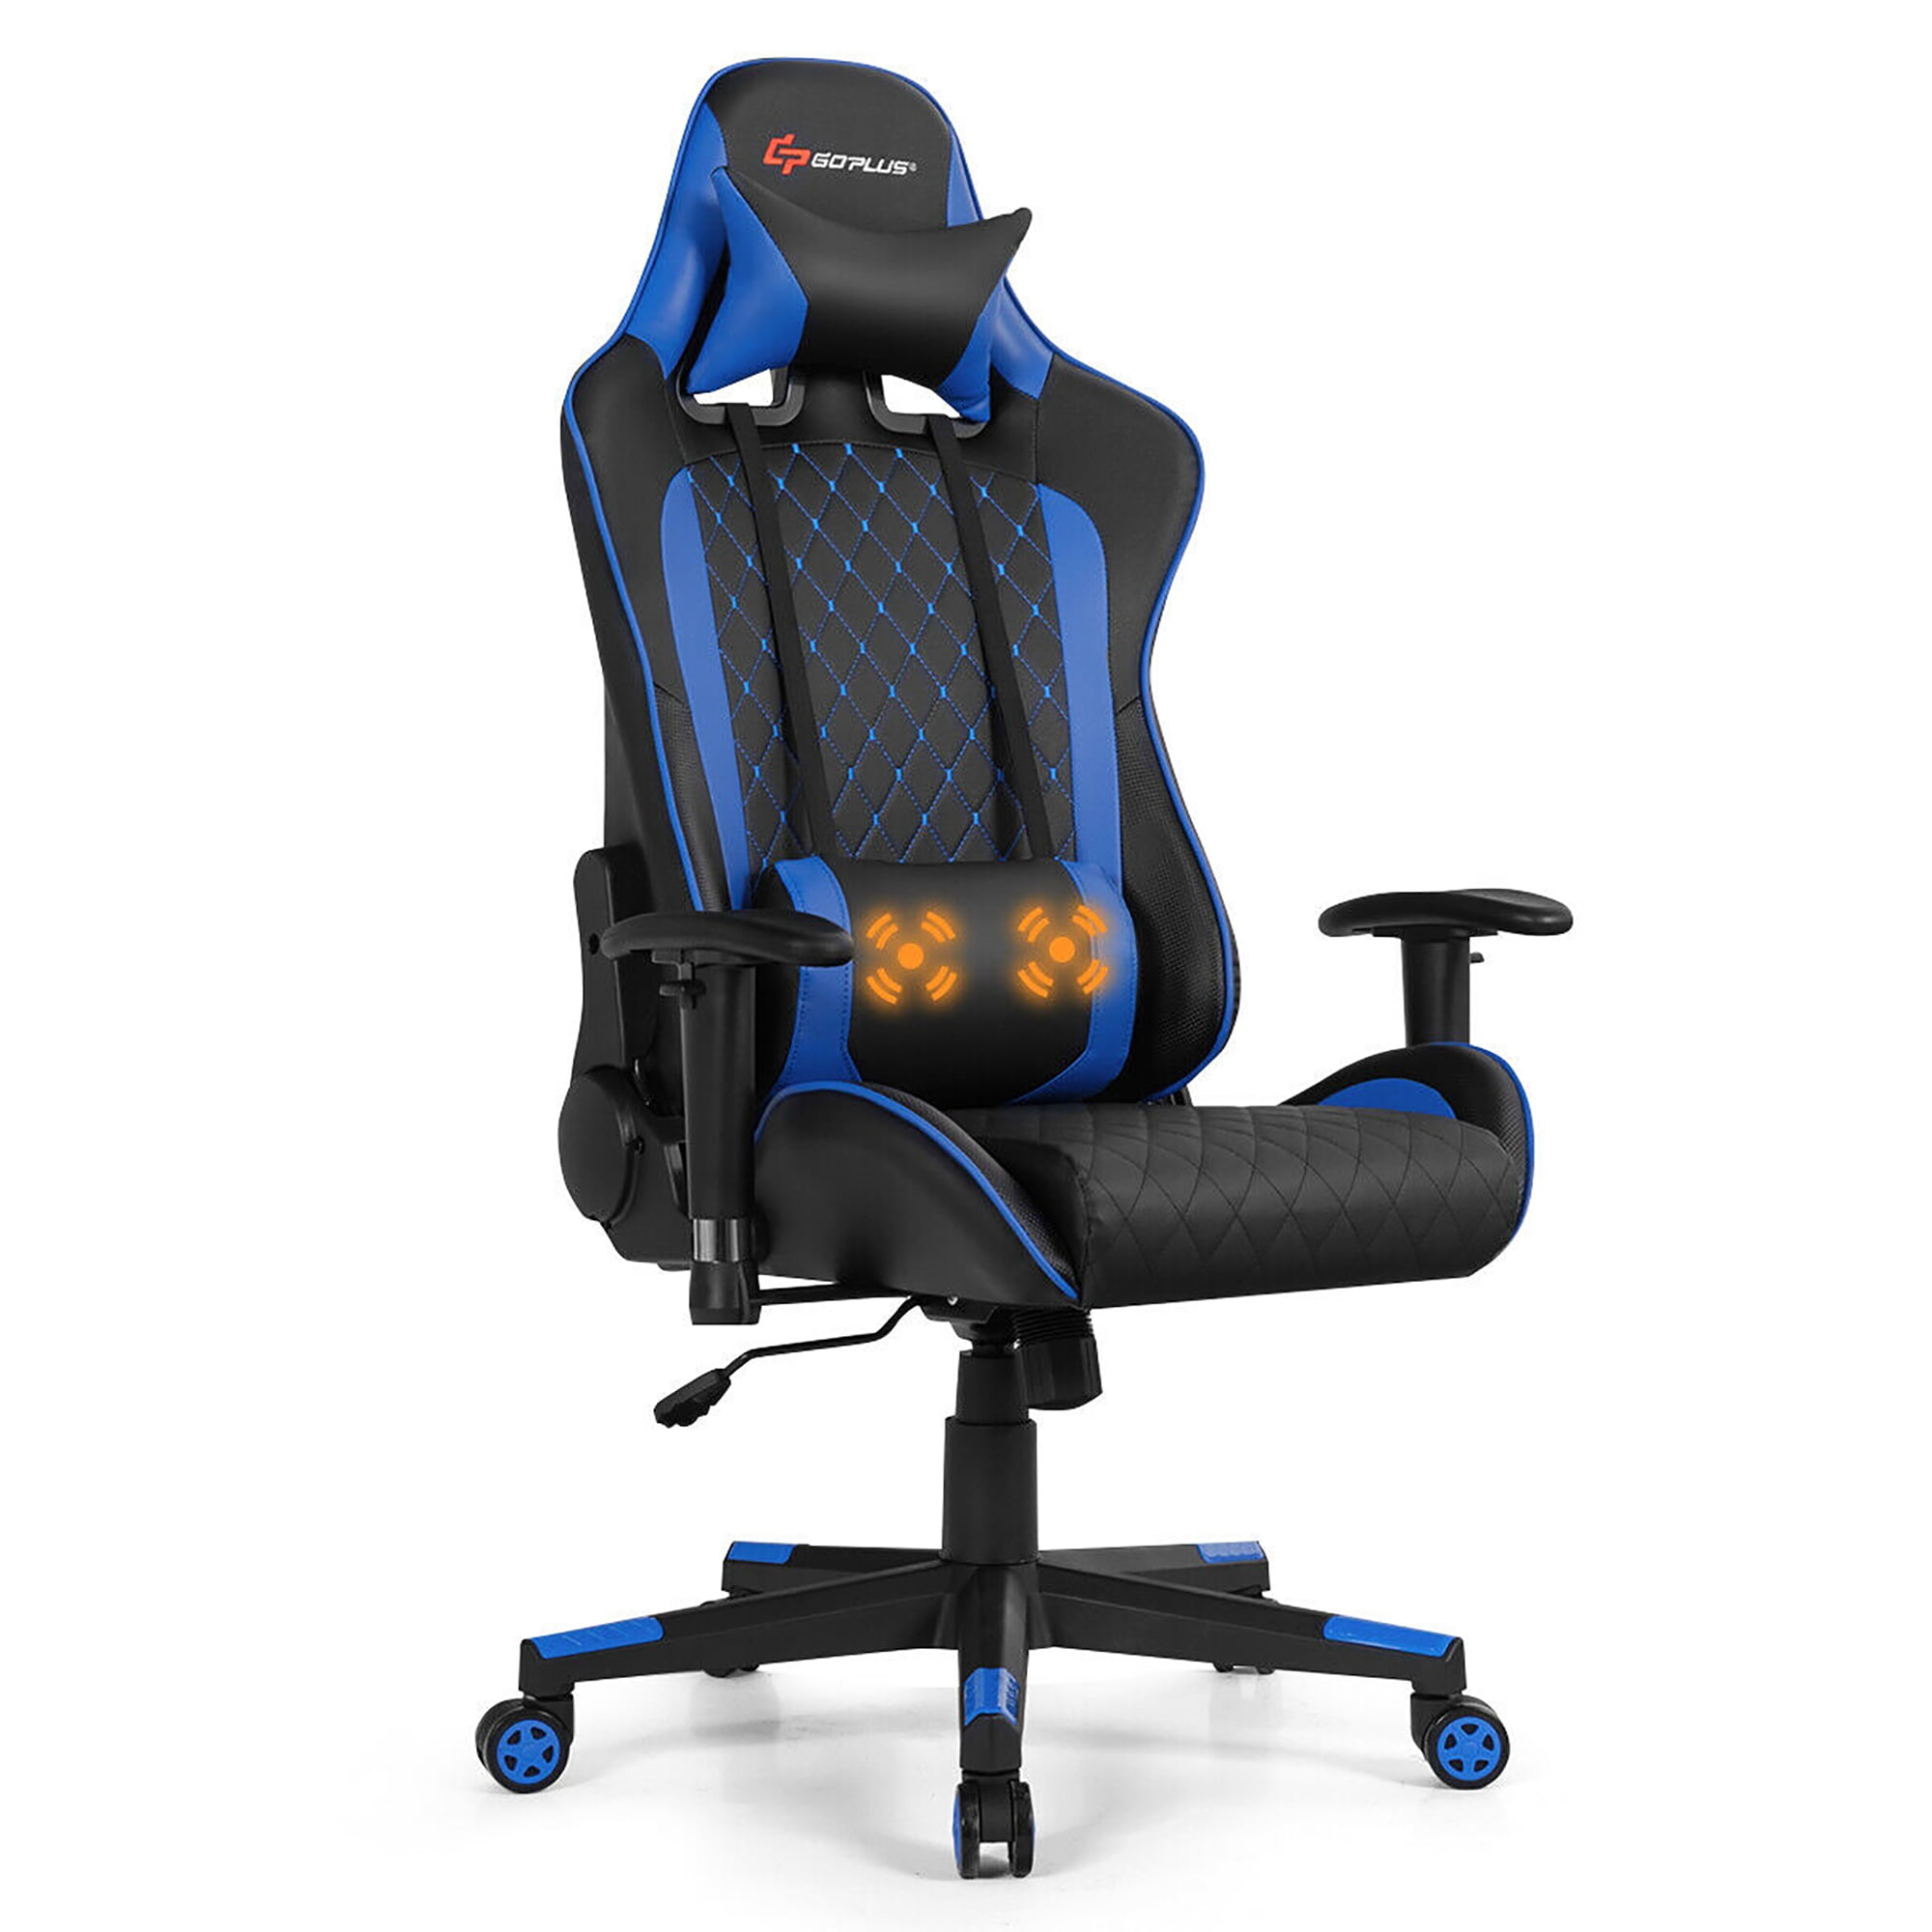 Minimalist Best Gaming Chairs Walmart for Small Space